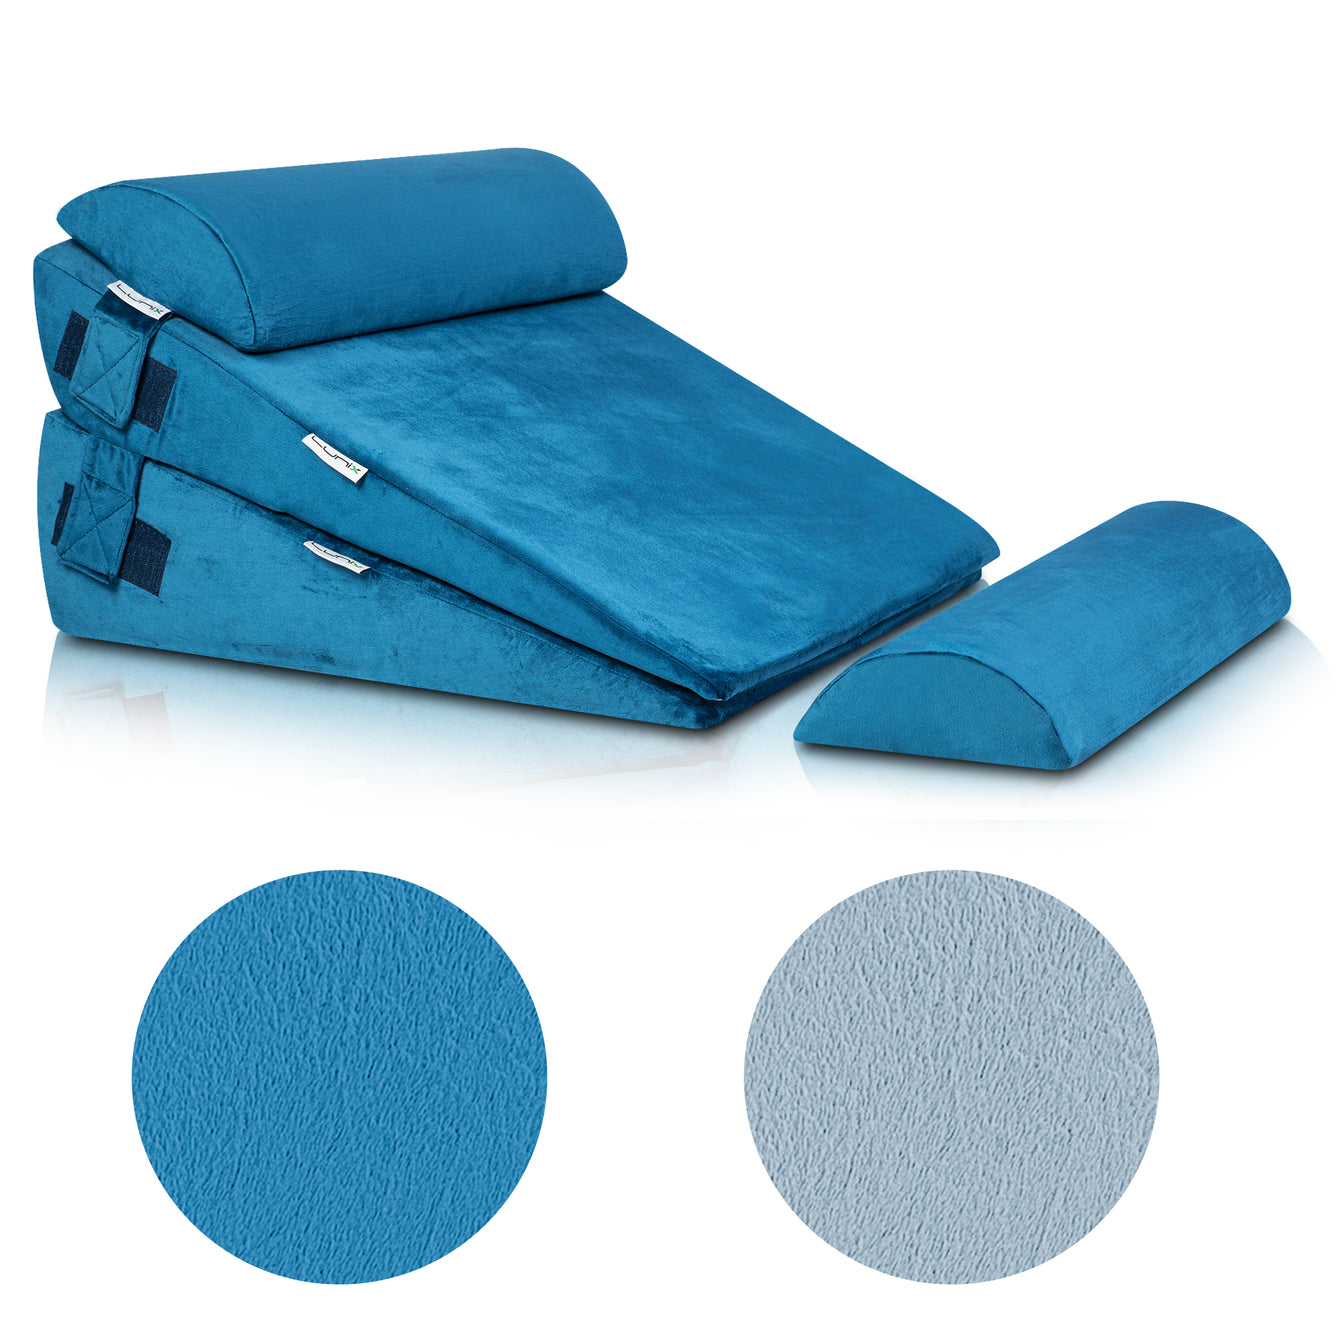 Cover Set Only for LX8 2 Layers, Blue, Pillows and Foam not Included